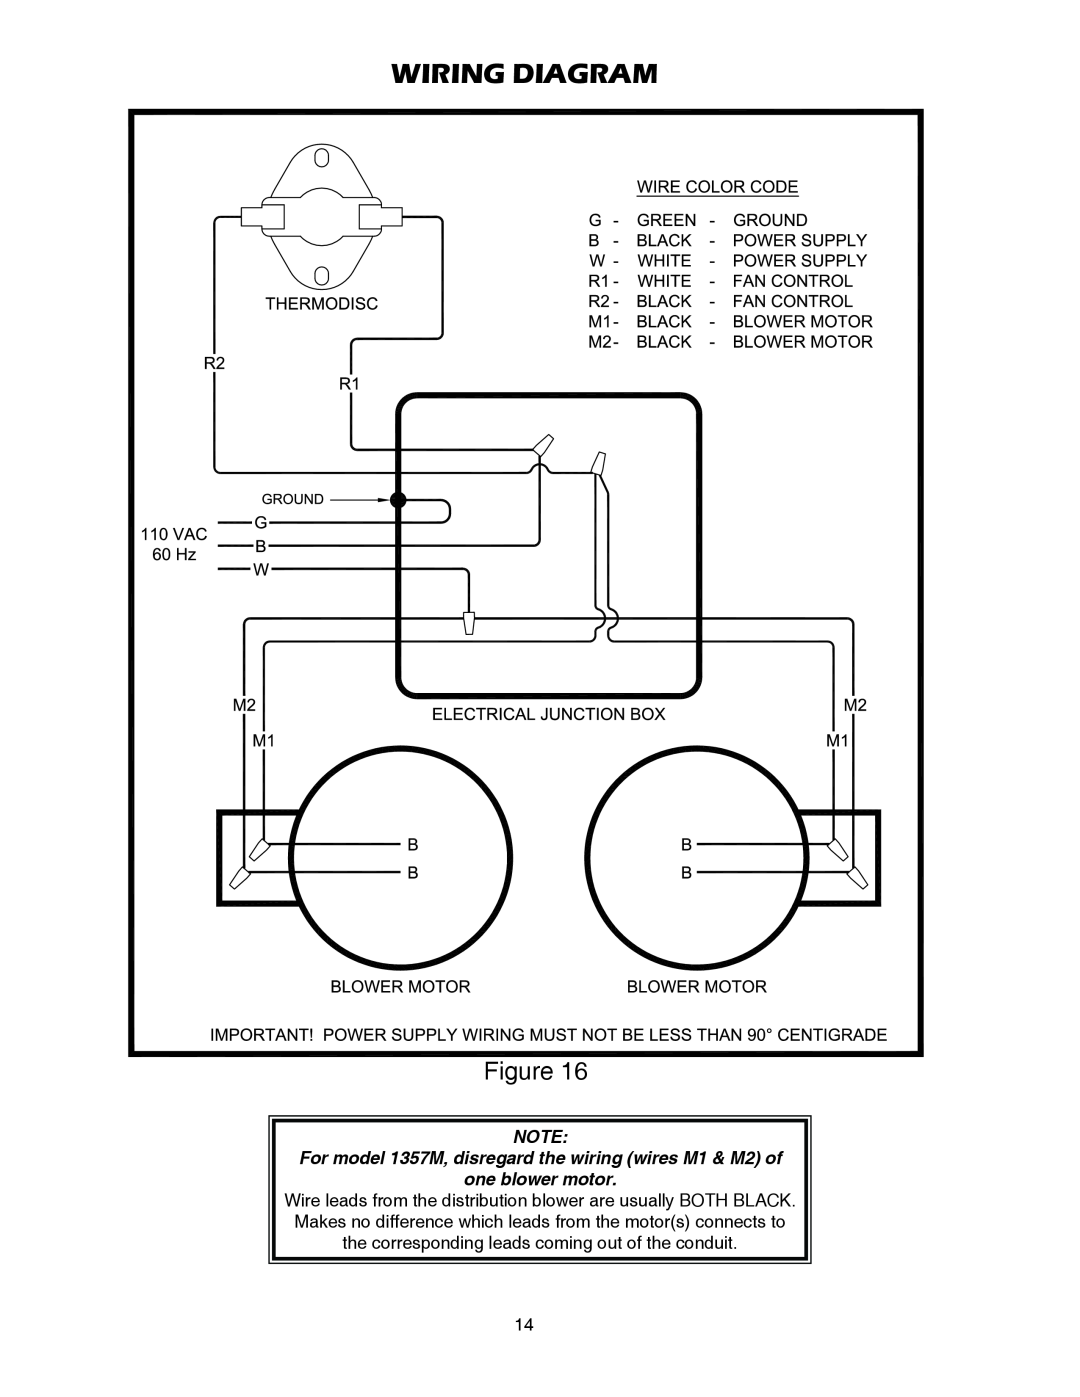 United States Stove 1557M, 1357M owner manual Wiring Diagram, one blower motor 